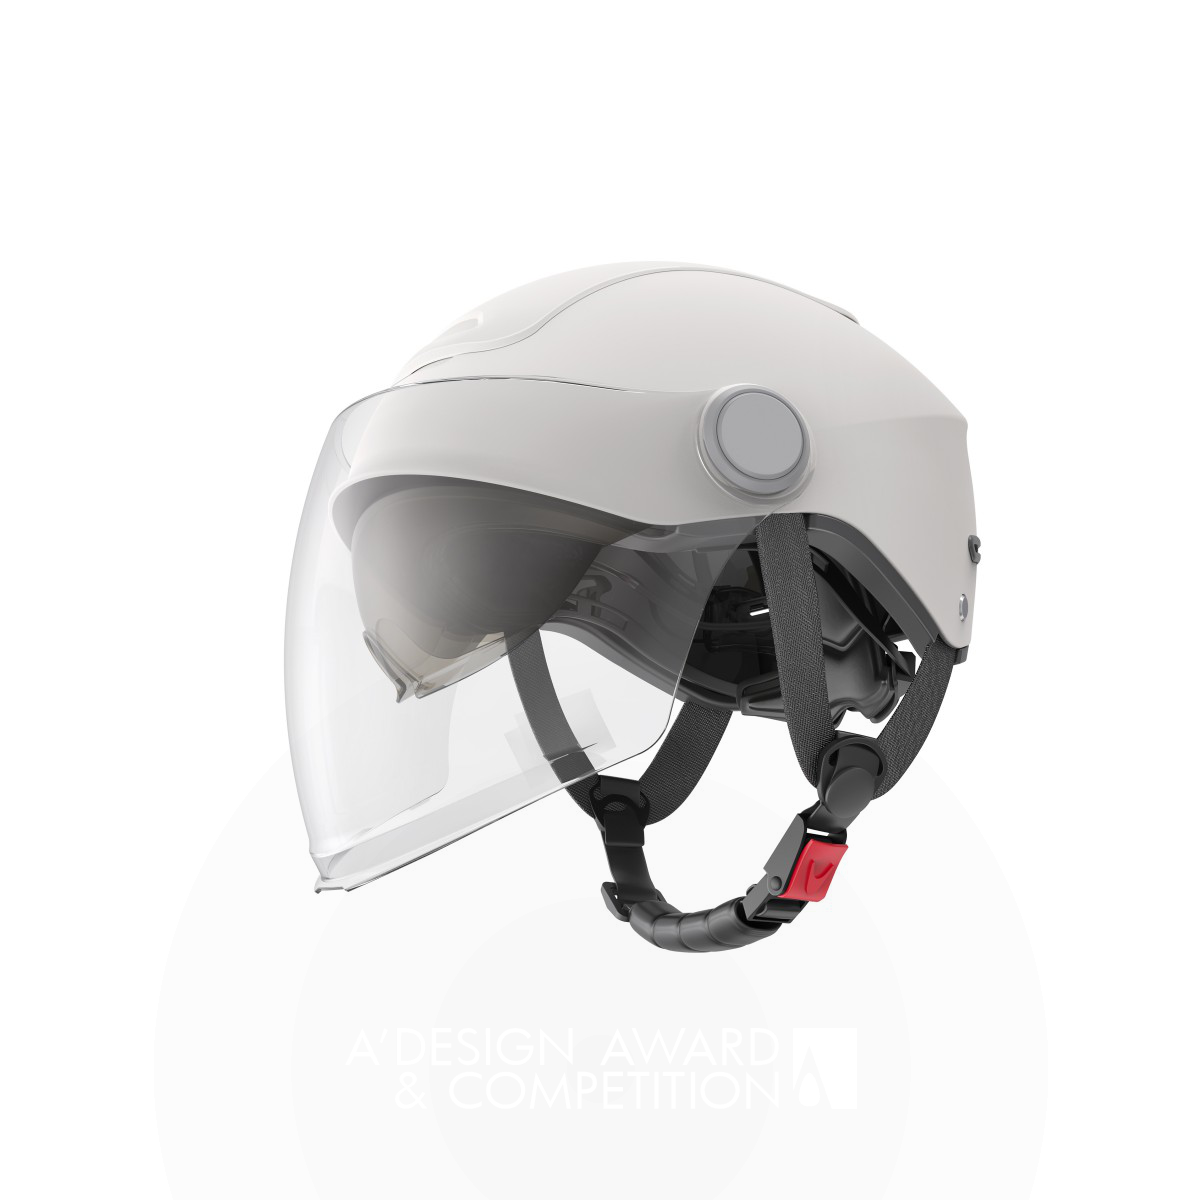 Hangzhou Bee Sports Co., Ltd. wins Bronze at the prestigious A' Safety Clothing and Personal Protective Equipment Design Award with Coziro Helmet.